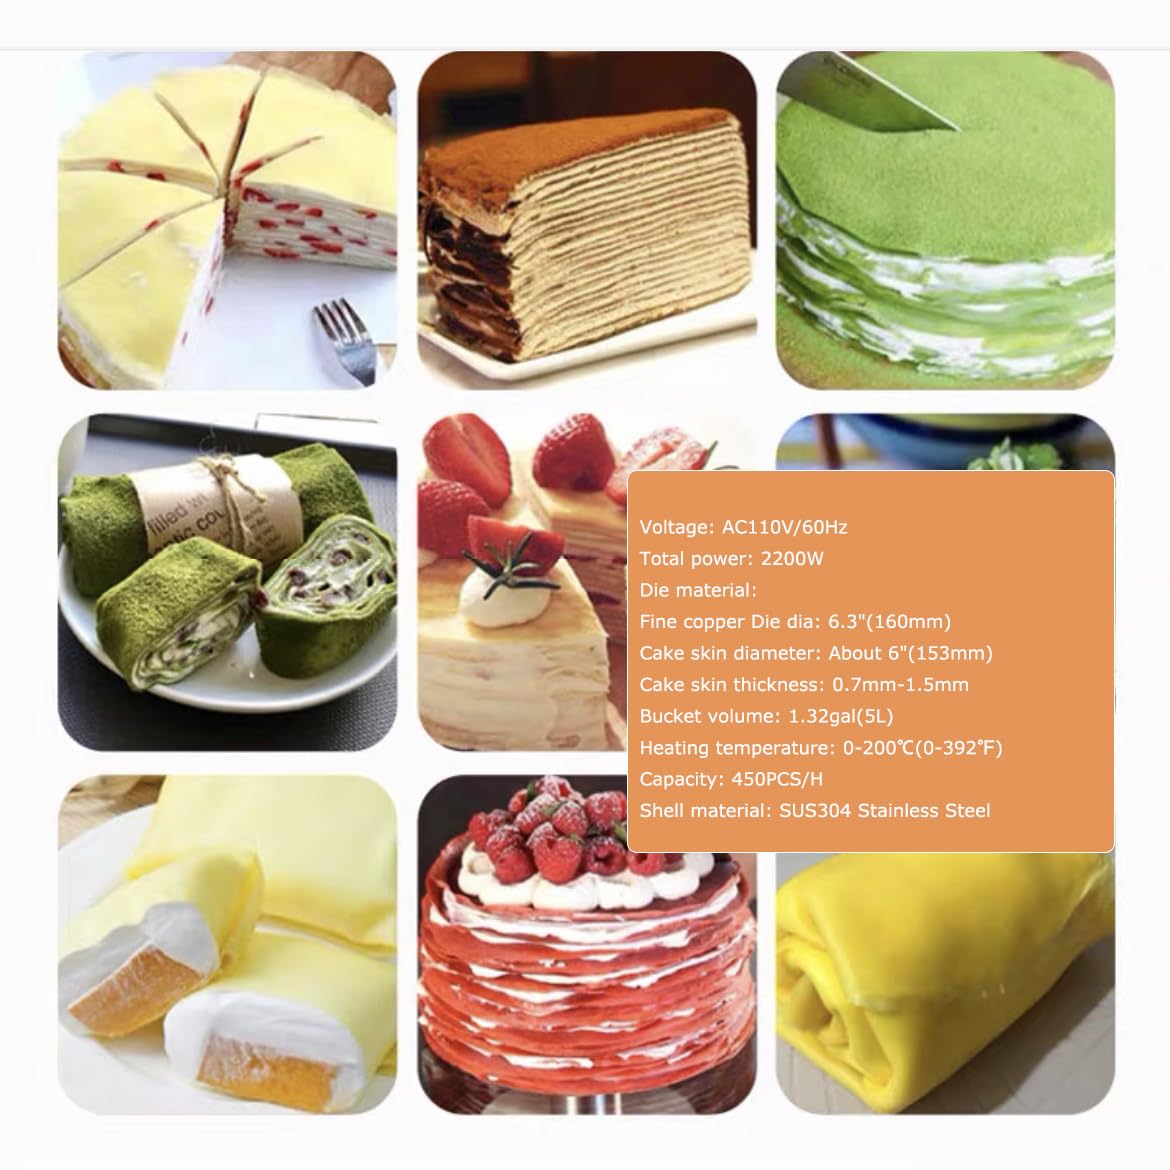 Pancake Wrapper Cake Machine Commercial Mille Crepe Cake Maker 6.3inch Layer Cake Making Machine Durian Mango Mille-feuille Maker 0.7mm-1.5mm Adjustable Thickness 110V 2.2KW - Cooked Tortilla Machine - 11